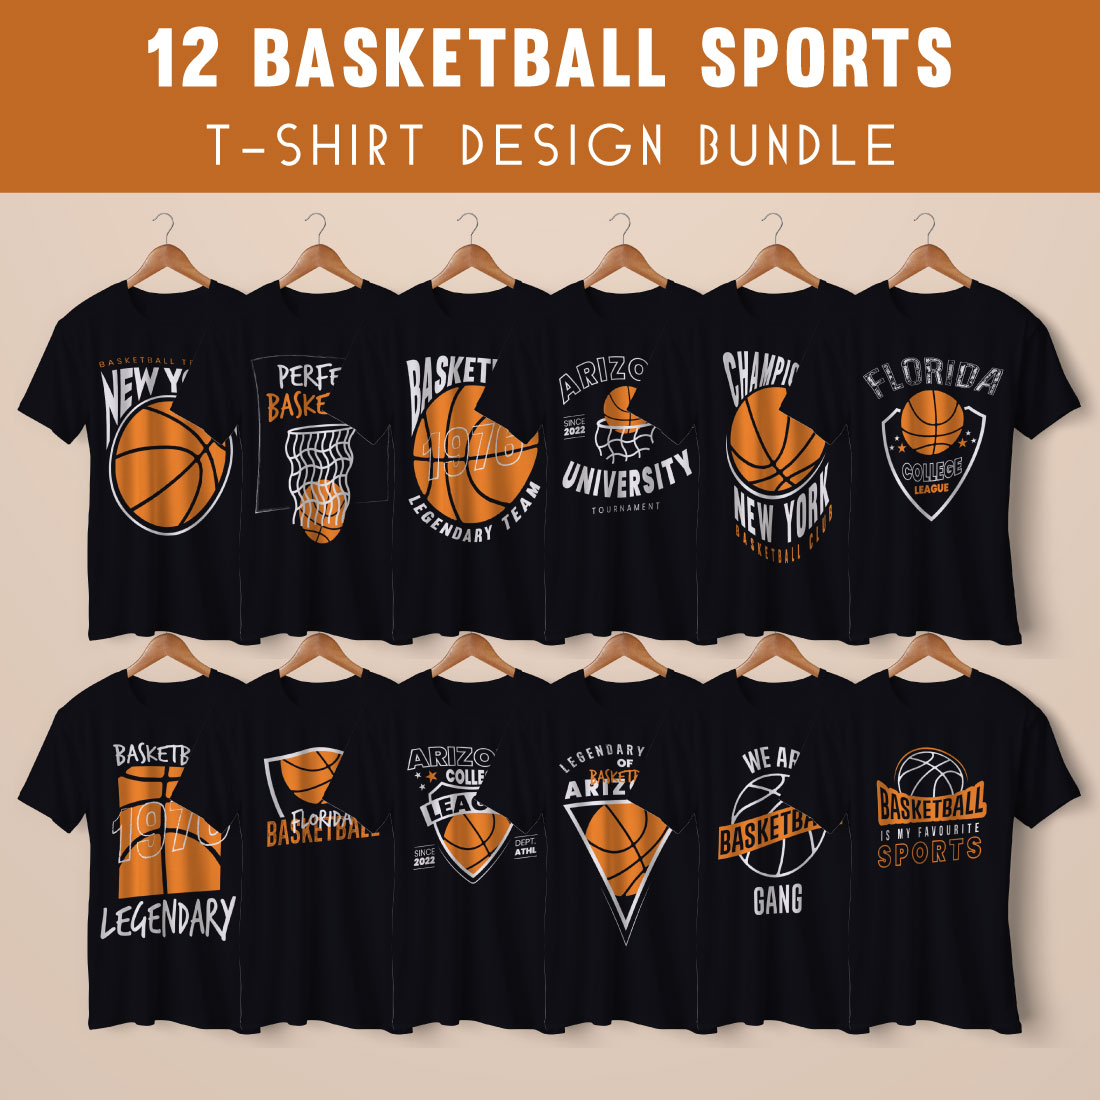 12 Basketball Sports T-shirt Design Bundle Vector Templated cover image.